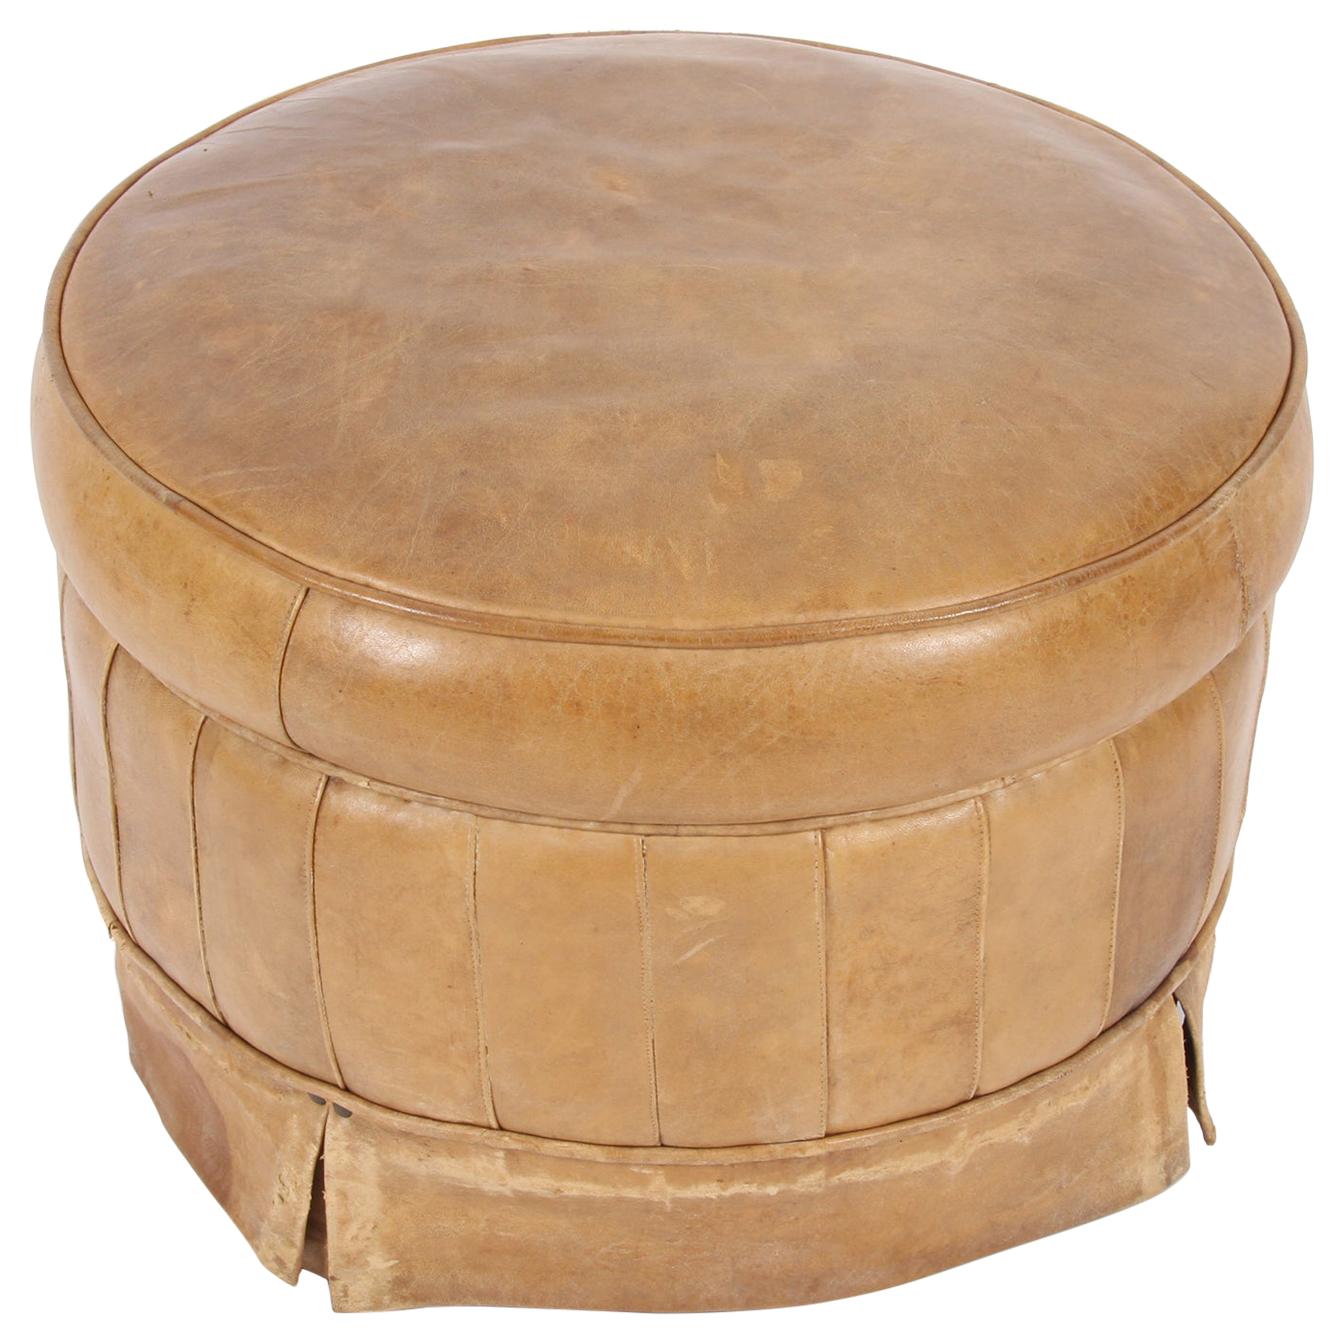 English Mid-20th Century Leather Footstool For Sale